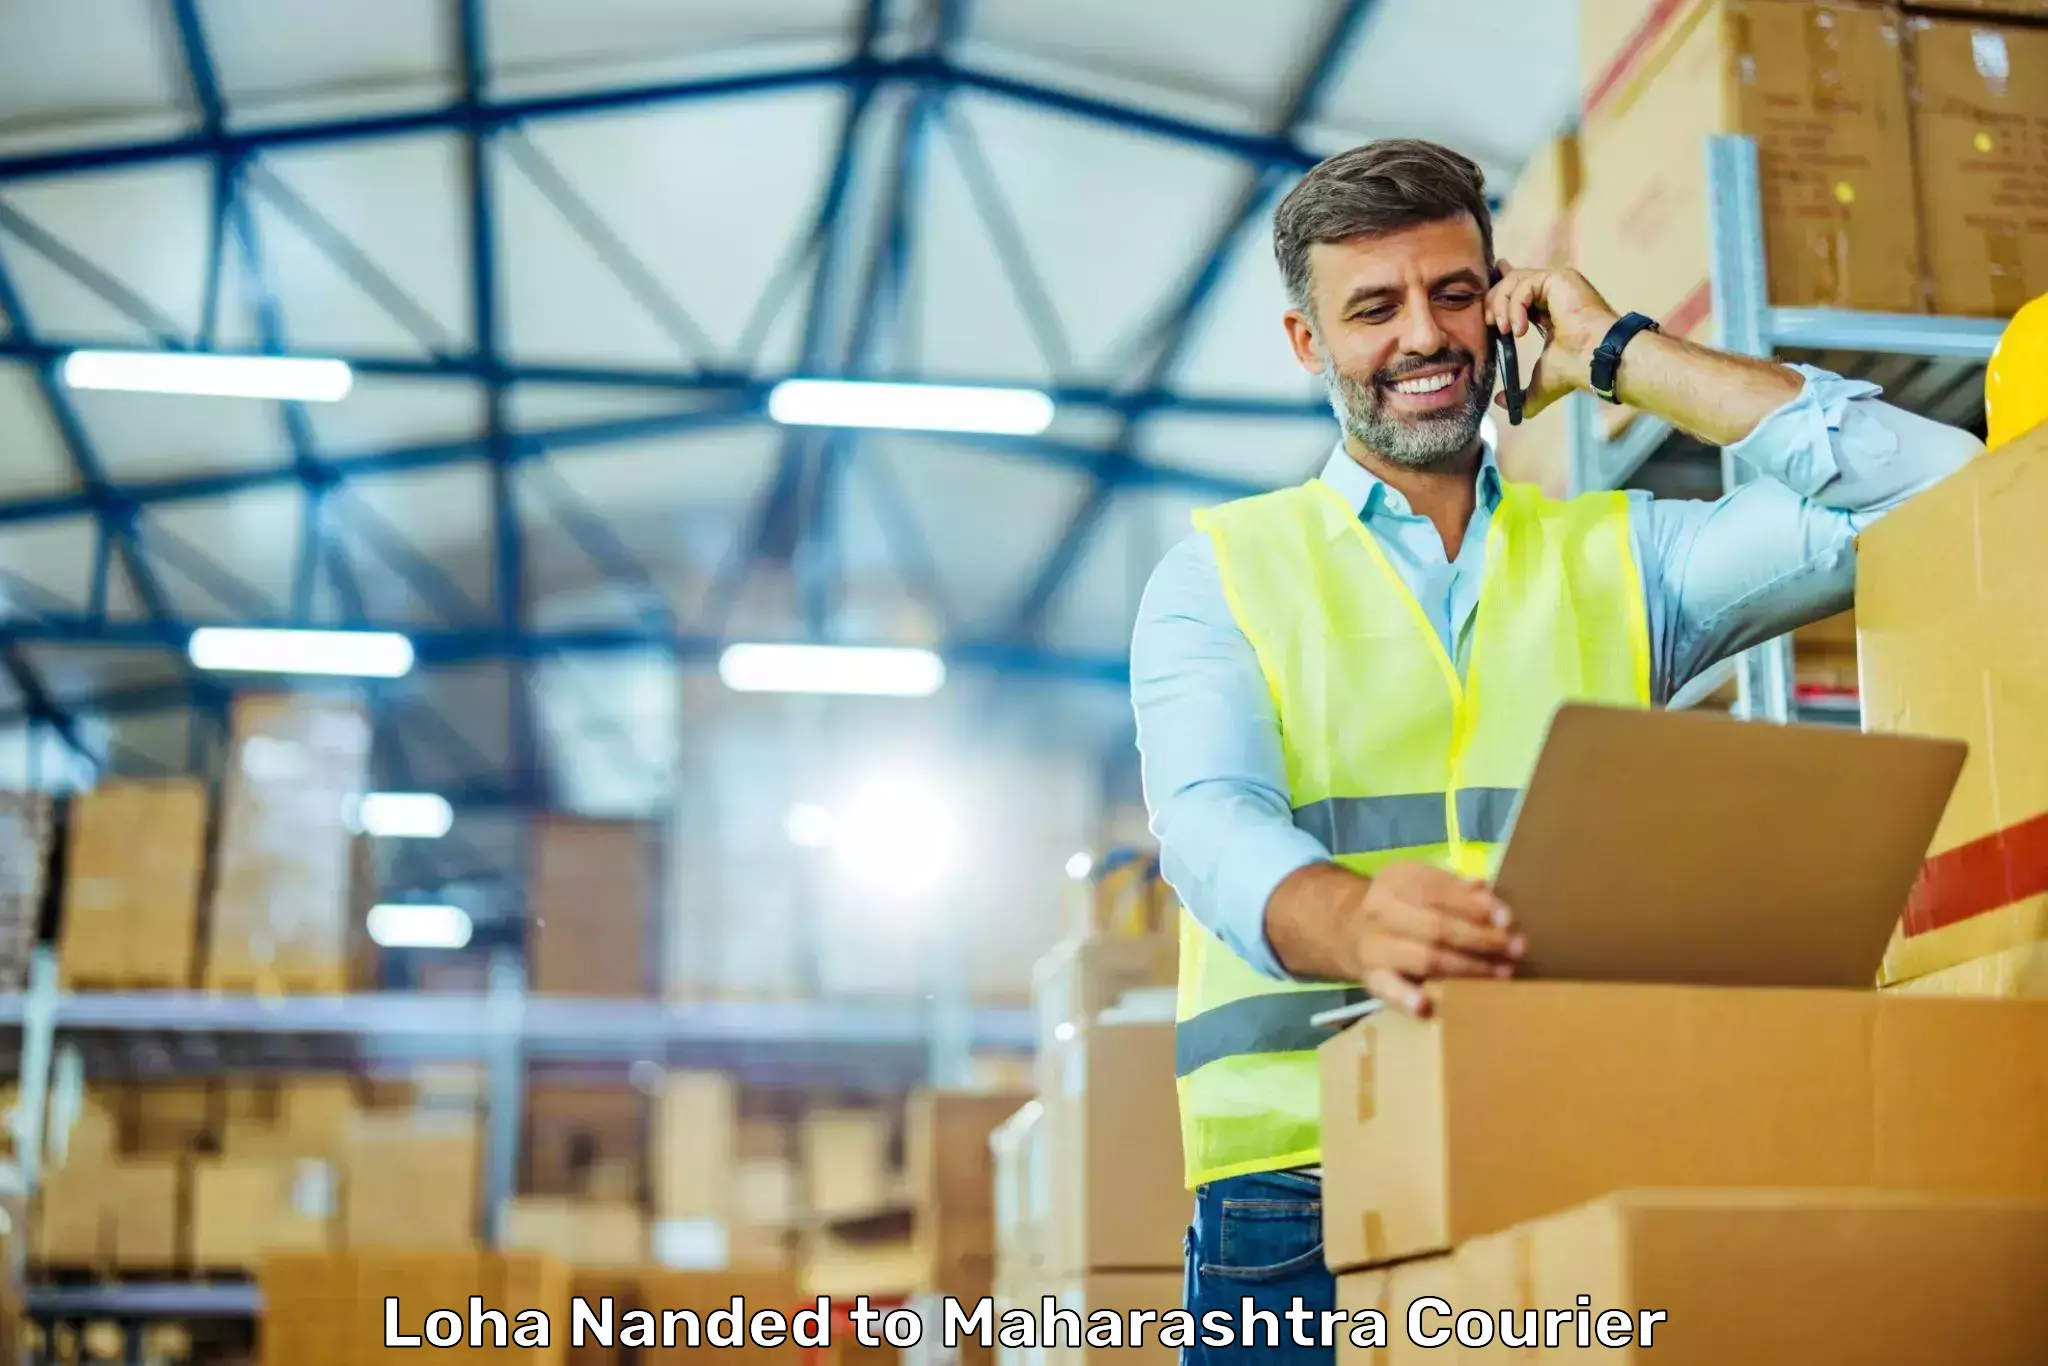 State-of-the-art courier technology Loha Nanded to Andheri